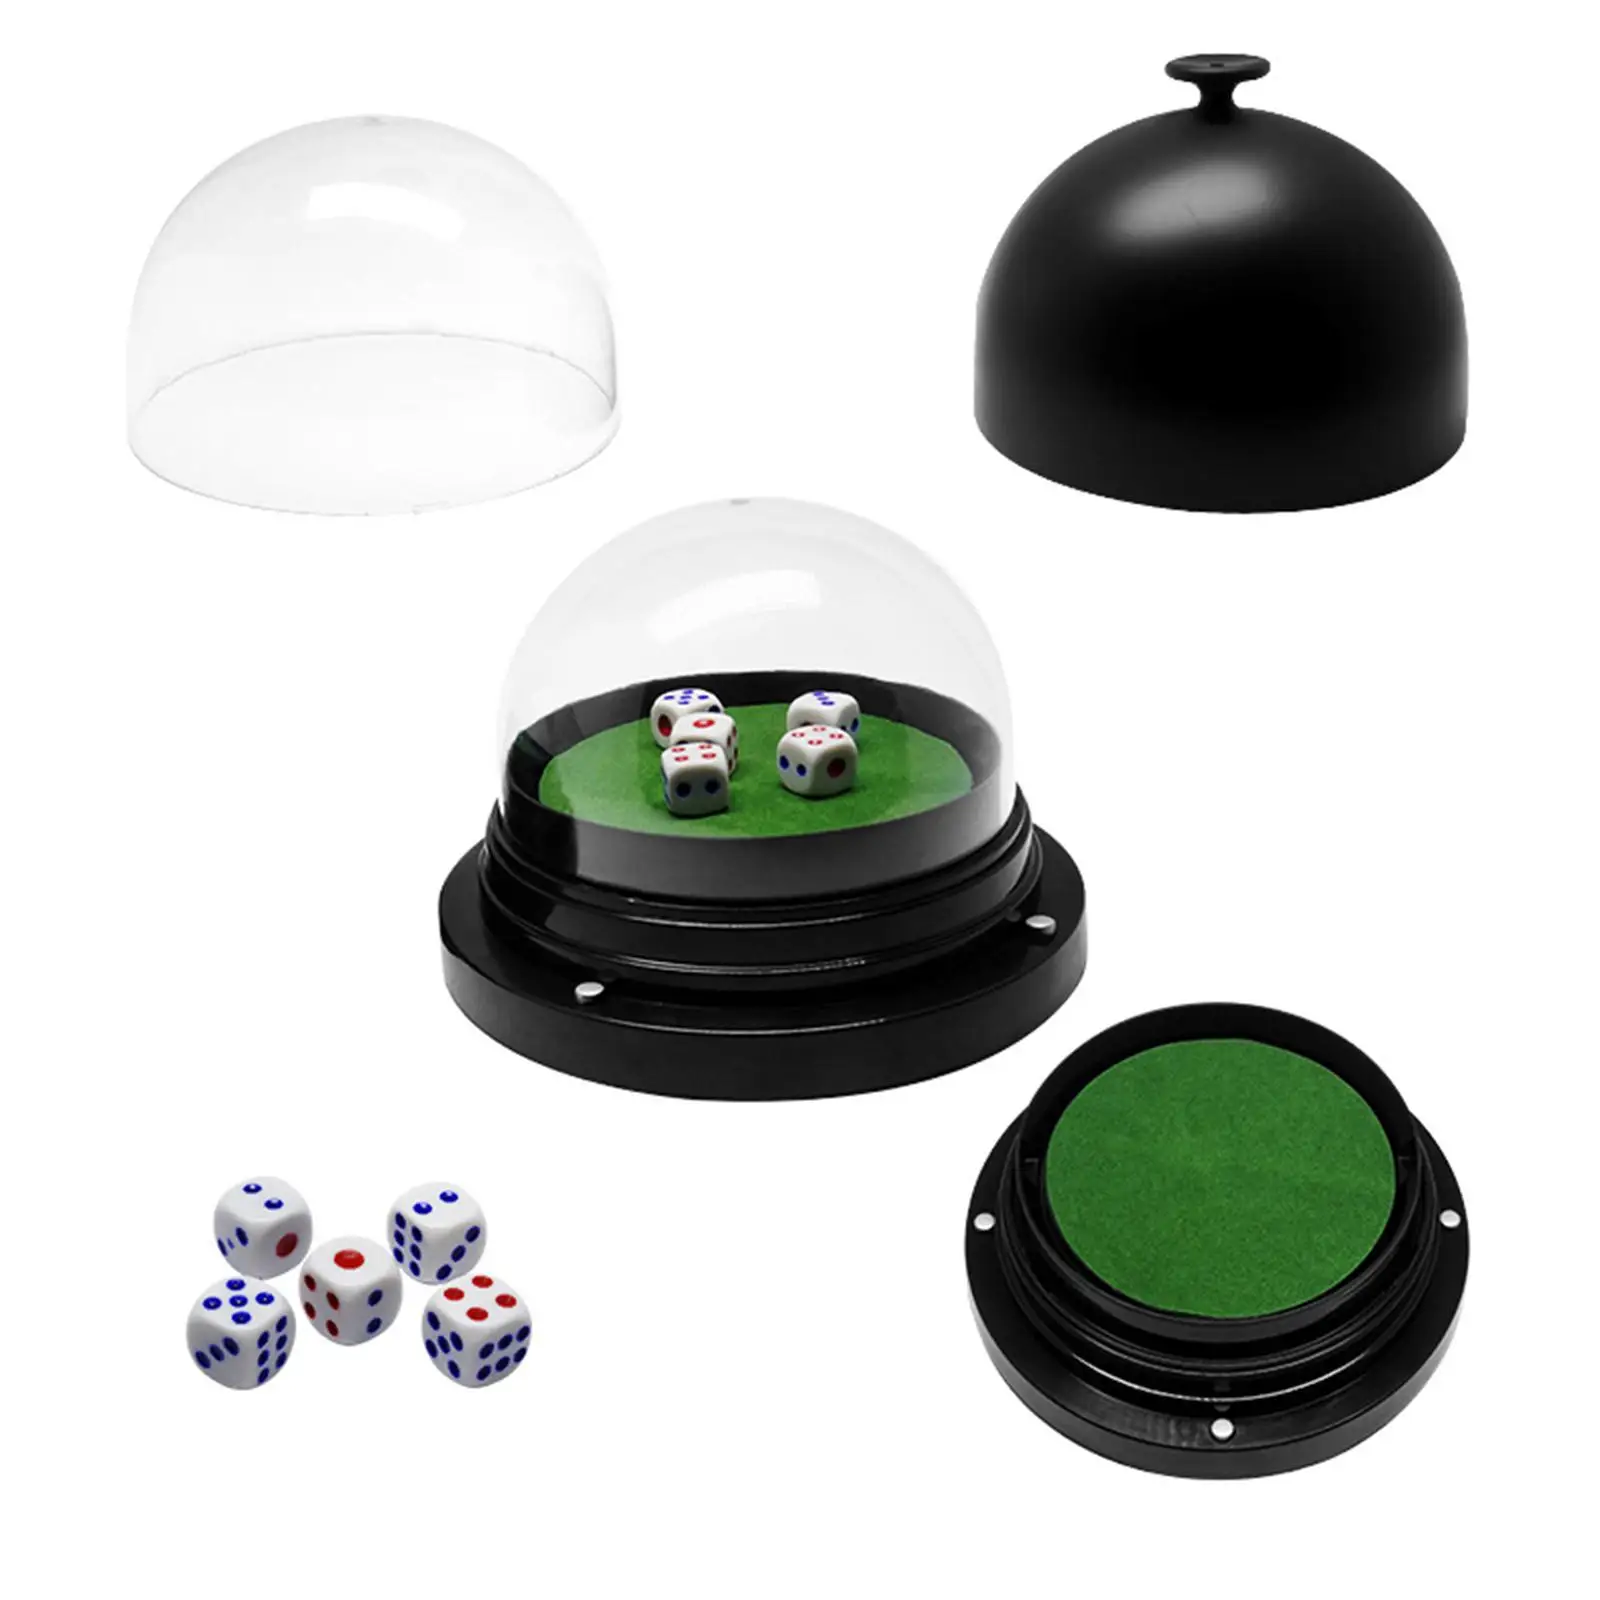 Dice Cup Set Storage Lid Electrical Dice Cup Container Holder Dices Bar Game for KTV Entertainment Hotel Party 